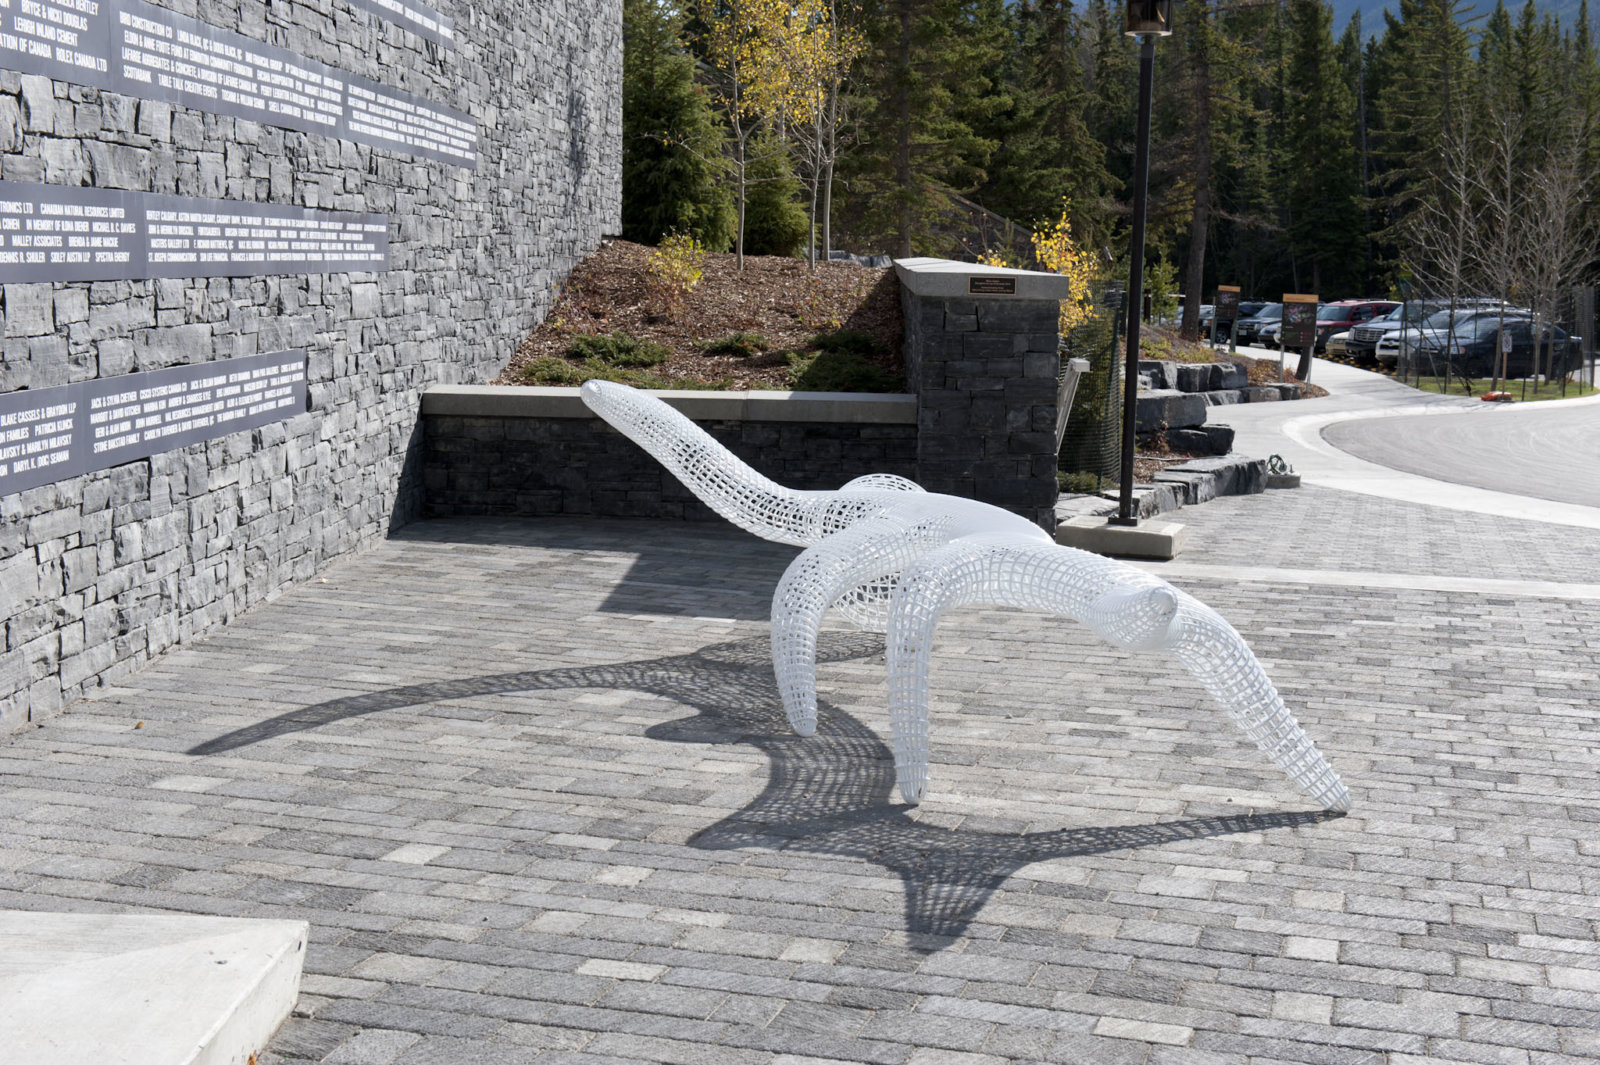 Brian Jungen, The ghosts on top of my head, 2010–2011, painted stainless steel, dimensions variable. Installation view, The Banff Centre, Banff, AB